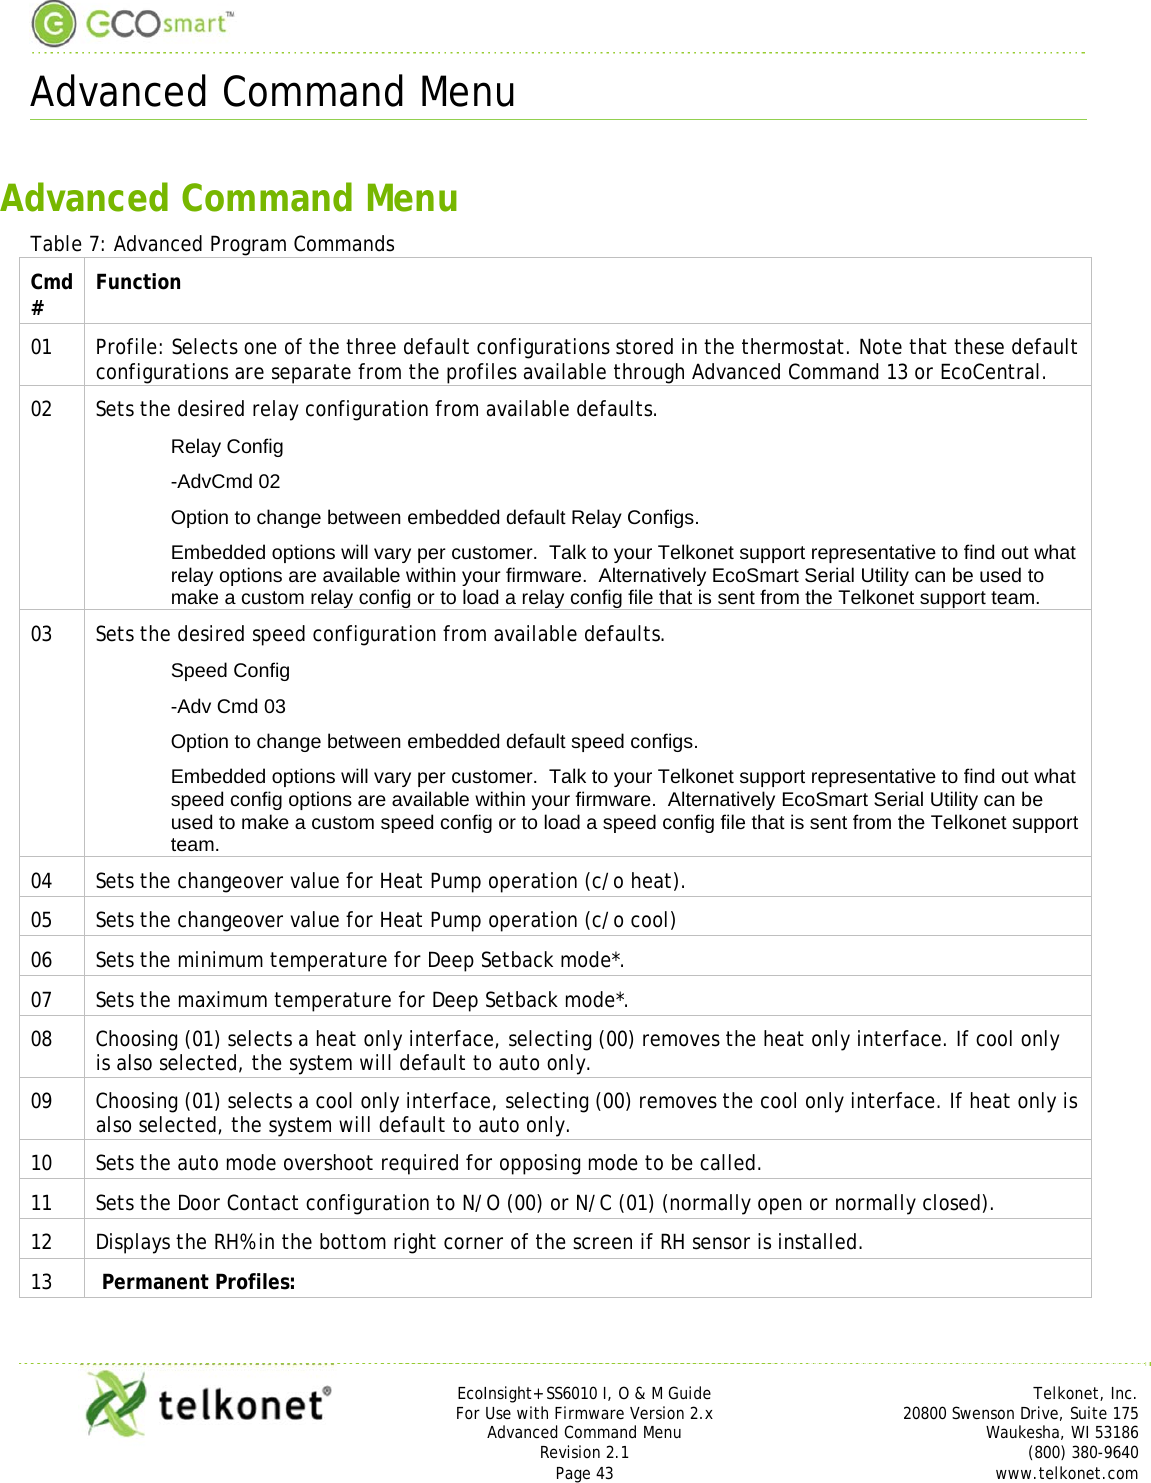  Advanced Command Menu     EcoInsight+ SS6010 I, O &amp; M Guide Telkonet, Inc. For Use with Firmware Version 2.x 20800 Swenson Drive, Suite 175 Advanced Command Menu Waukesha, WI 53186 Revision 2.1   (800) 380-9640 Page 43  www.telkonet.com  Advanced Command Menu Table 7: Advanced Program Commands Cmd #  Function 01  Profile: Selects one of the three default configurations stored in the thermostat. Note that these default configurations are separate from the profiles available through Advanced Command 13 or EcoCentral. 02  Sets the desired relay configuration from available defaults. Relay Config -AdvCmd 02 Option to change between embedded default Relay Configs. Embedded options will vary per customer.  Talk to your Telkonet support representative to find out what relay options are available within your firmware.  Alternatively EcoSmart Serial Utility can be used to make a custom relay config or to load a relay config file that is sent from the Telkonet support team.   03  Sets the desired speed configuration from available defaults. Speed Config -Adv Cmd 03  Option to change between embedded default speed configs.   Embedded options will vary per customer.  Talk to your Telkonet support representative to find out what speed config options are available within your firmware.  Alternatively EcoSmart Serial Utility can be used to make a custom speed config or to load a speed config file that is sent from the Telkonet support team.   04  Sets the changeover value for Heat Pump operation (c/o heat). 05  Sets the changeover value for Heat Pump operation (c/o cool) 06  Sets the minimum temperature for Deep Setback mode*. 07  Sets the maximum temperature for Deep Setback mode*. 08  Choosing (01) selects a heat only interface, selecting (00) removes the heat only interface. If cool only is also selected, the system will default to auto only. 09  Choosing (01) selects a cool only interface, selecting (00) removes the cool only interface. If heat only is also selected, the system will default to auto only. 10  Sets the auto mode overshoot required for opposing mode to be called. 11  Sets the Door Contact configuration to N/O (00) or N/C (01) (normally open or normally closed). 12  Displays the RH% in the bottom right corner of the screen if RH sensor is installed. 13   Permanent Profiles:  